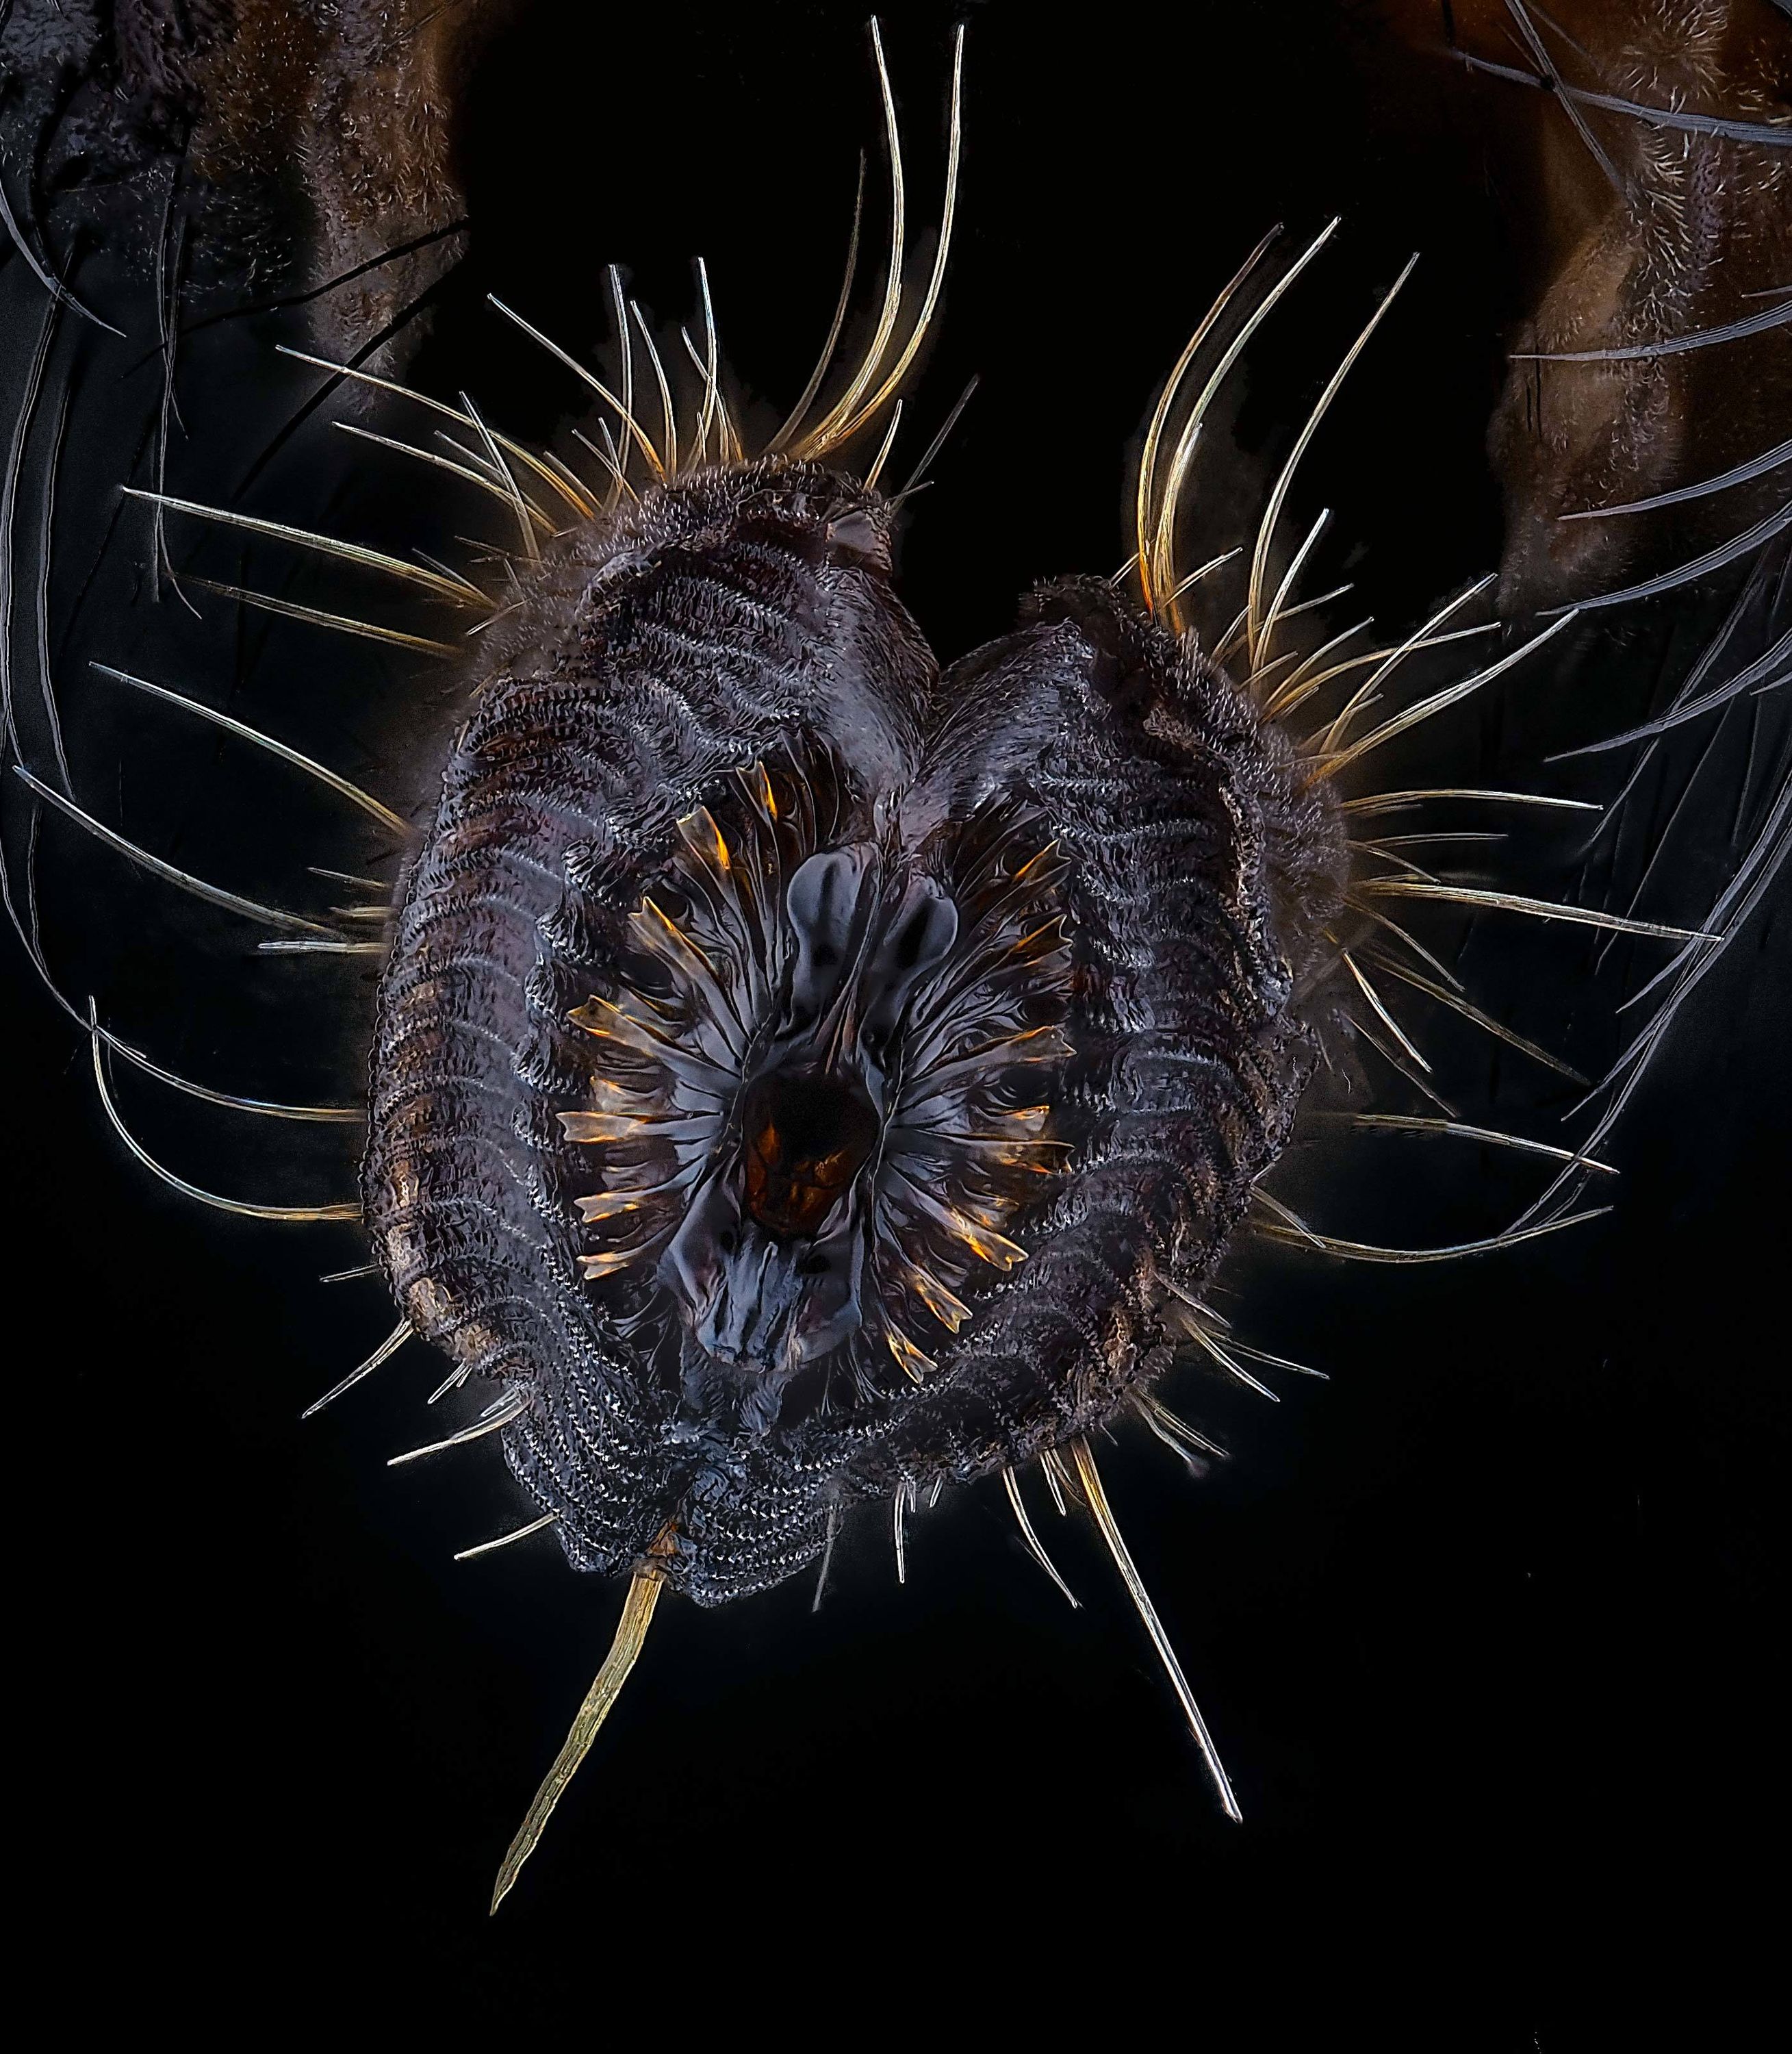 Proboscis of a house fly, Nikon Small World competition entry by Oliver Dum